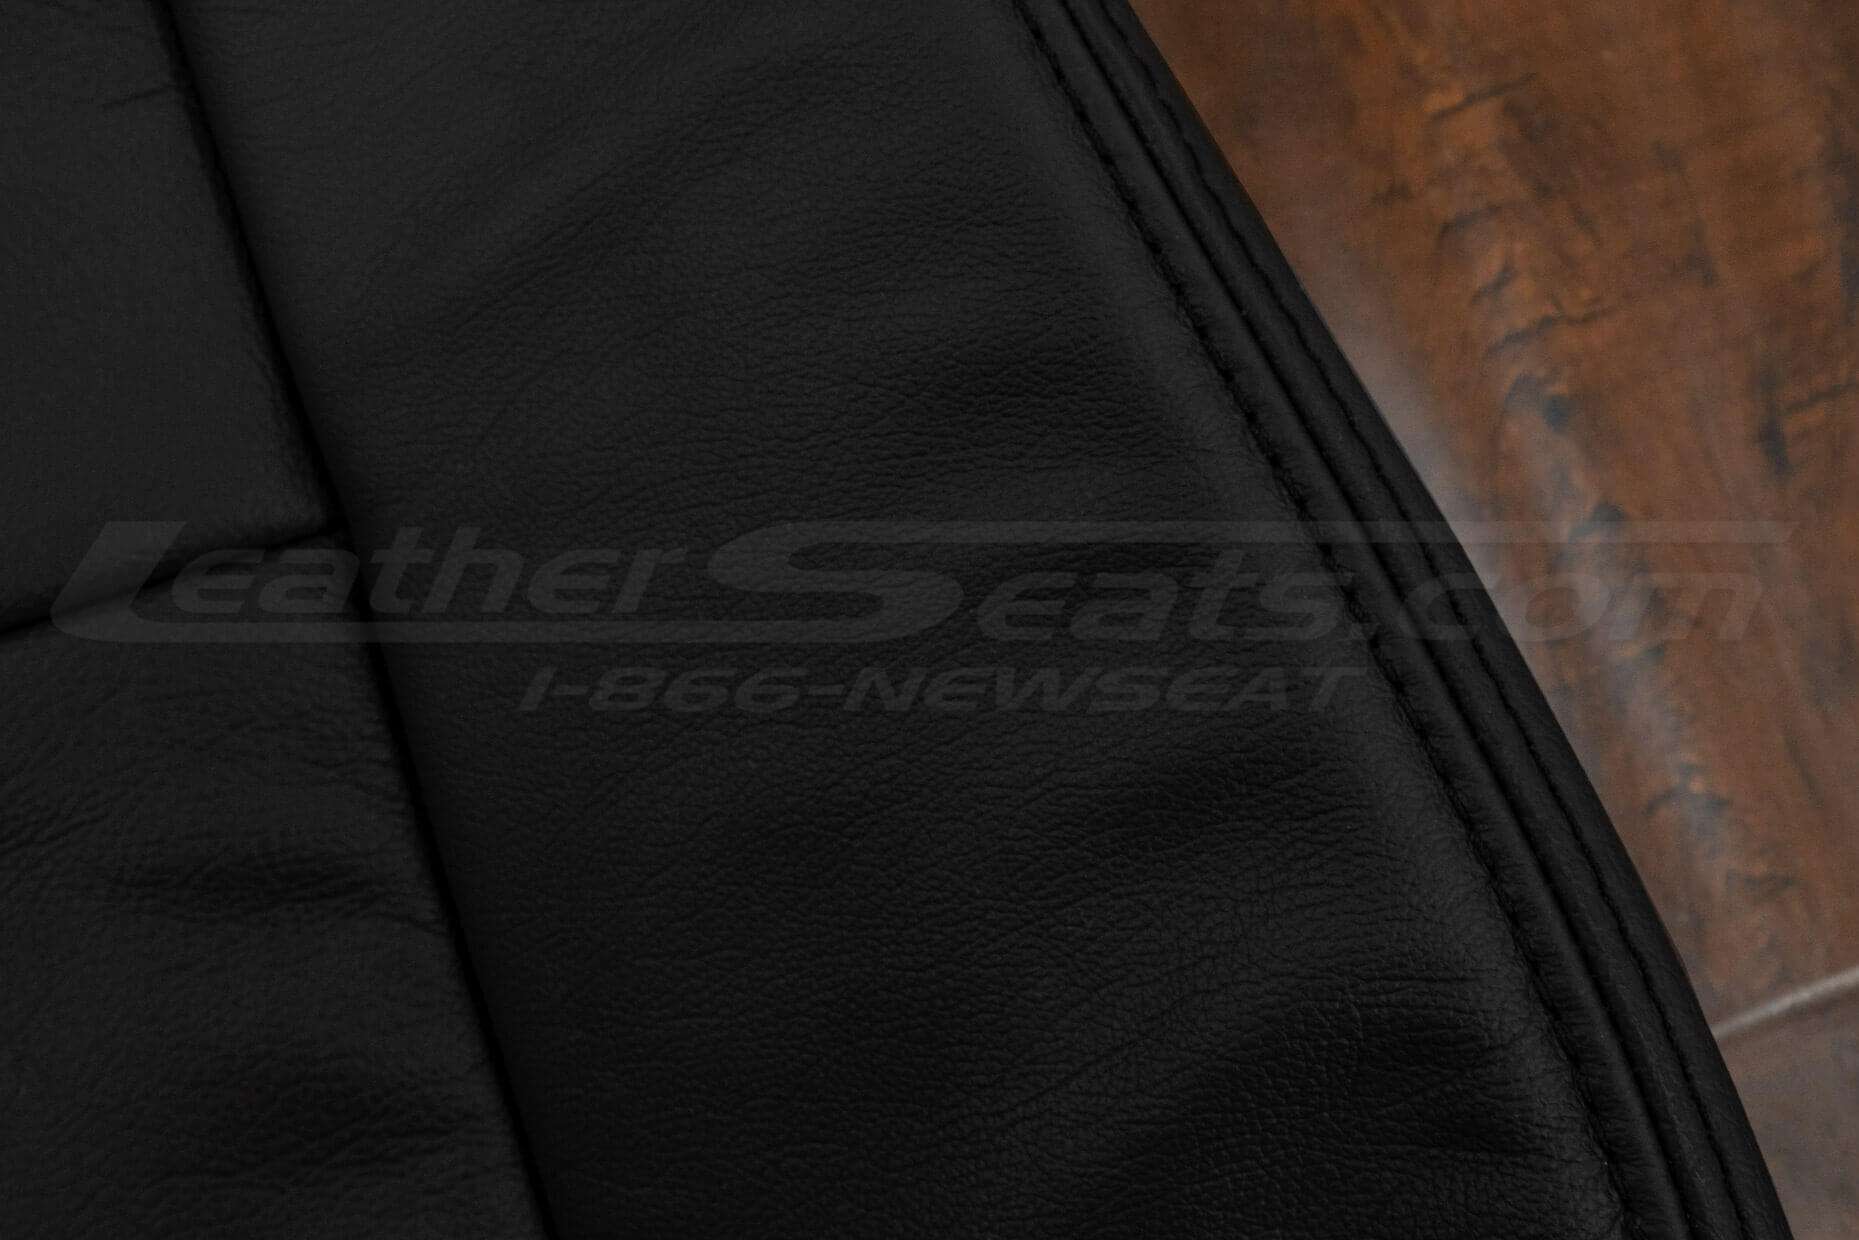 Black matching double stitching on leather upholstery